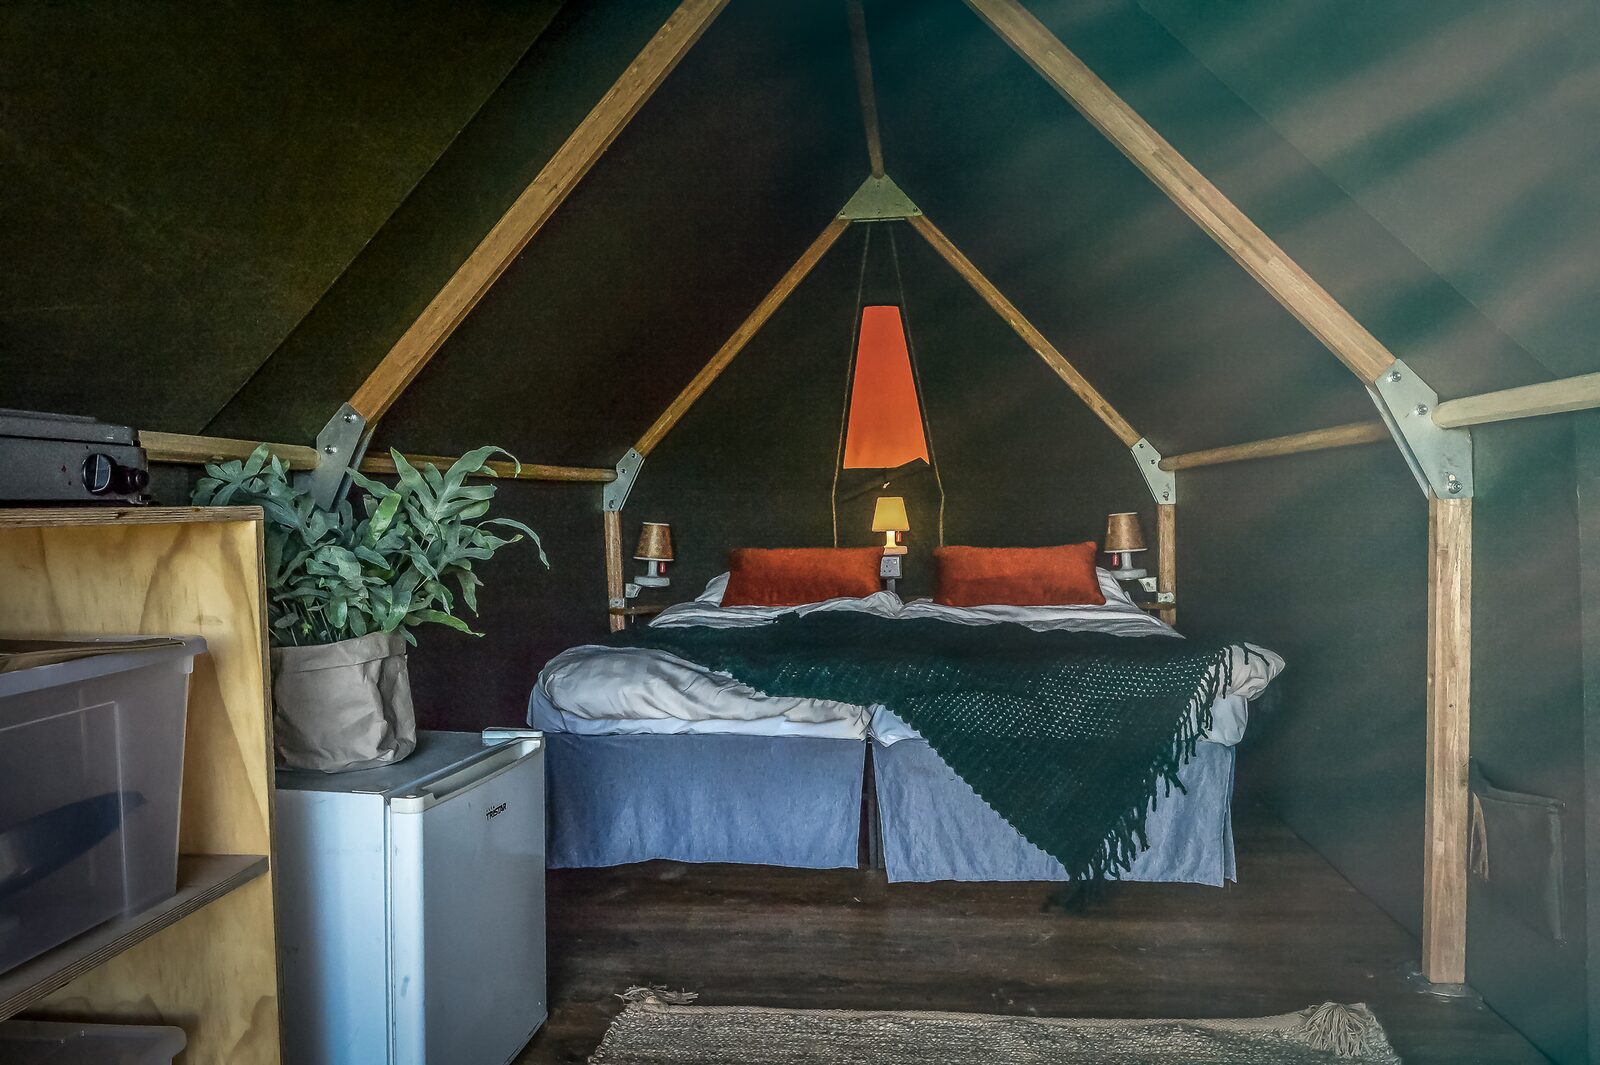 Pop-up glamping: 6x Awaji 2P + 6x Bell tent 2P | 24 pers.